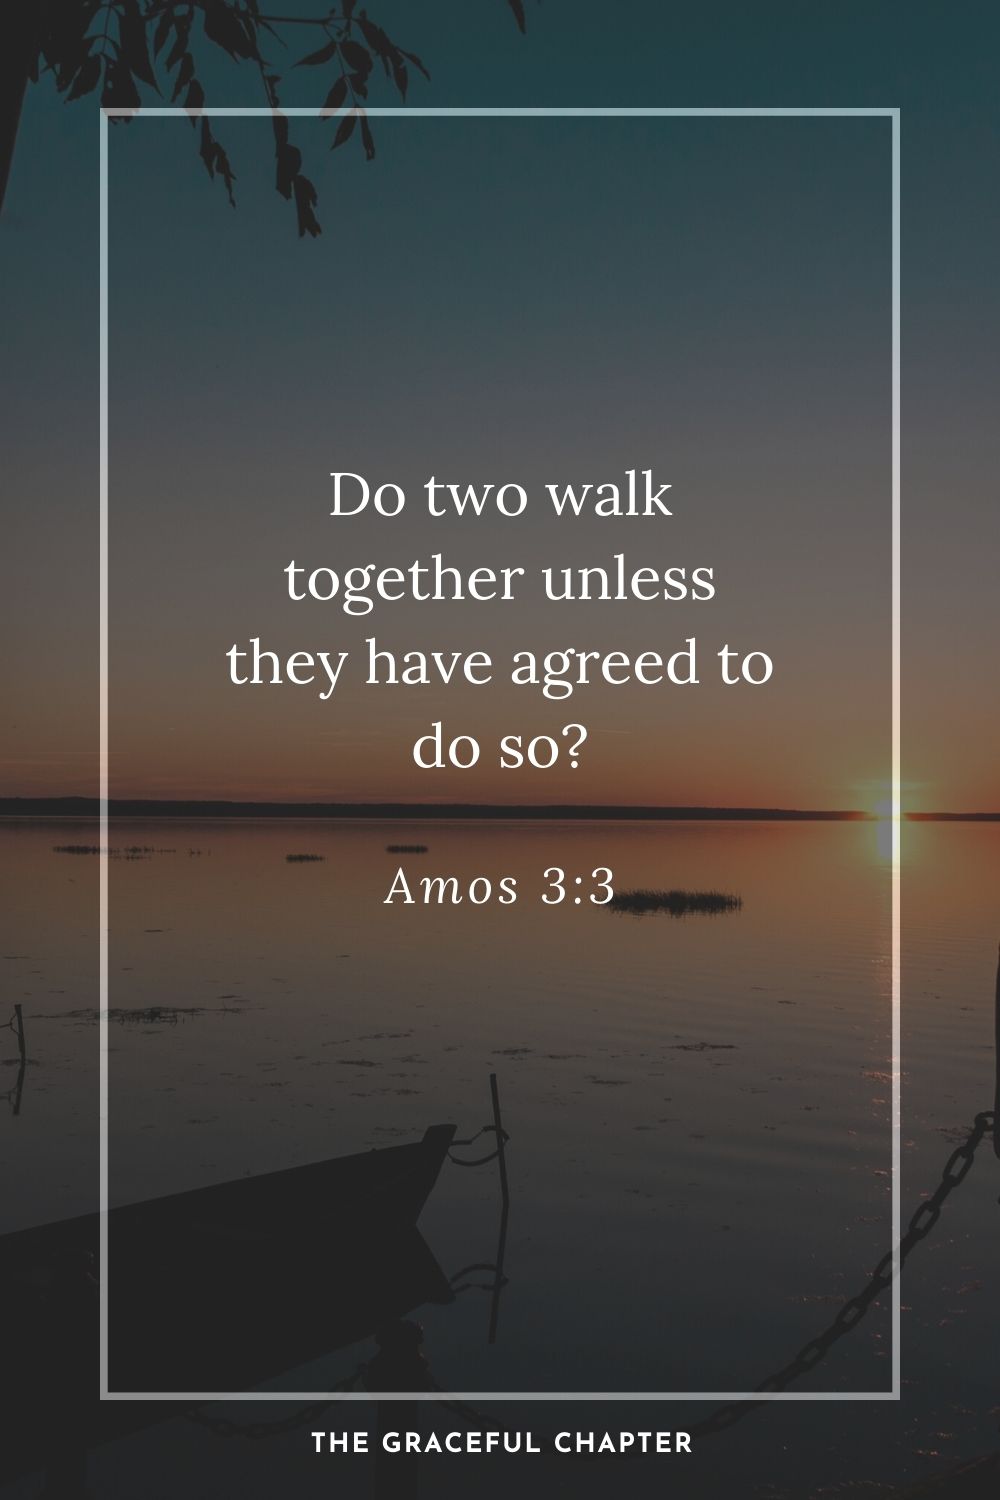 Do two walk together unless they have agreed to do so? Amos 3:3